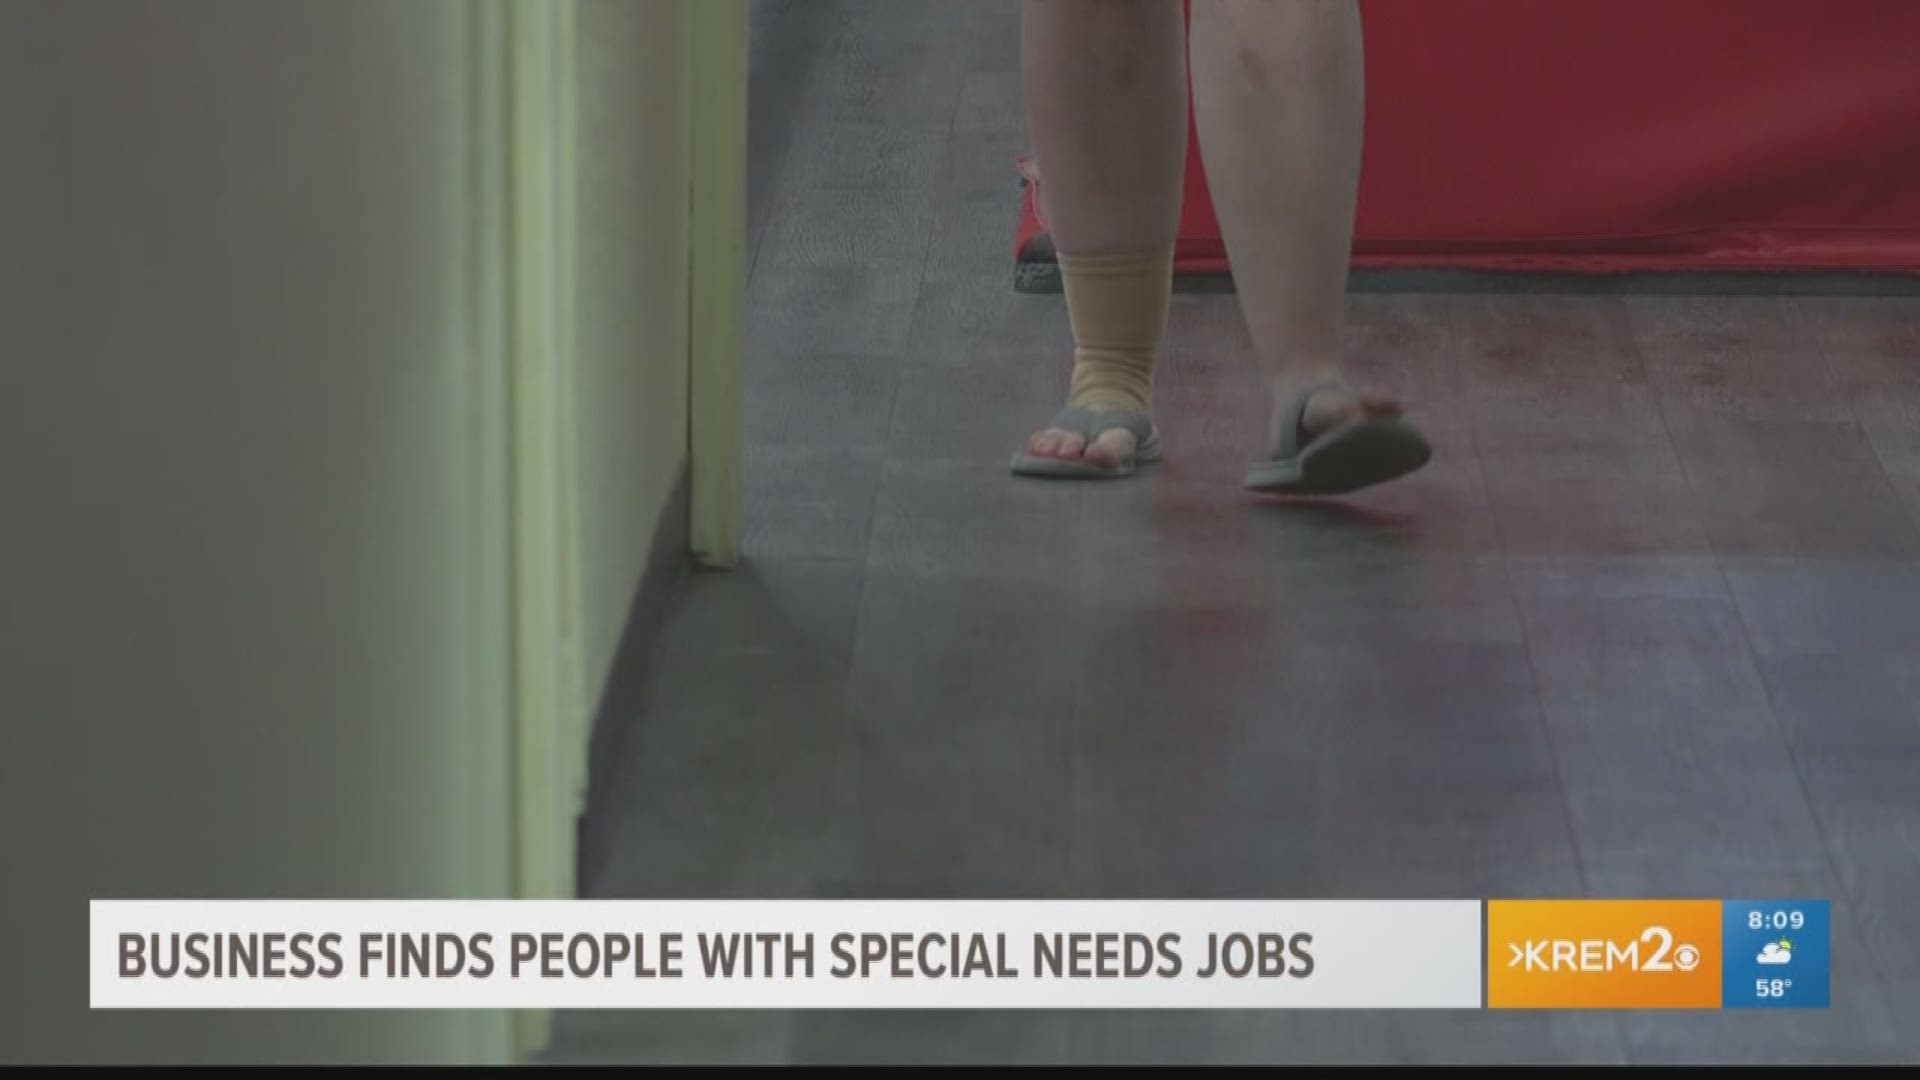 Local business finds jobs for people with special needs (6-13-18)